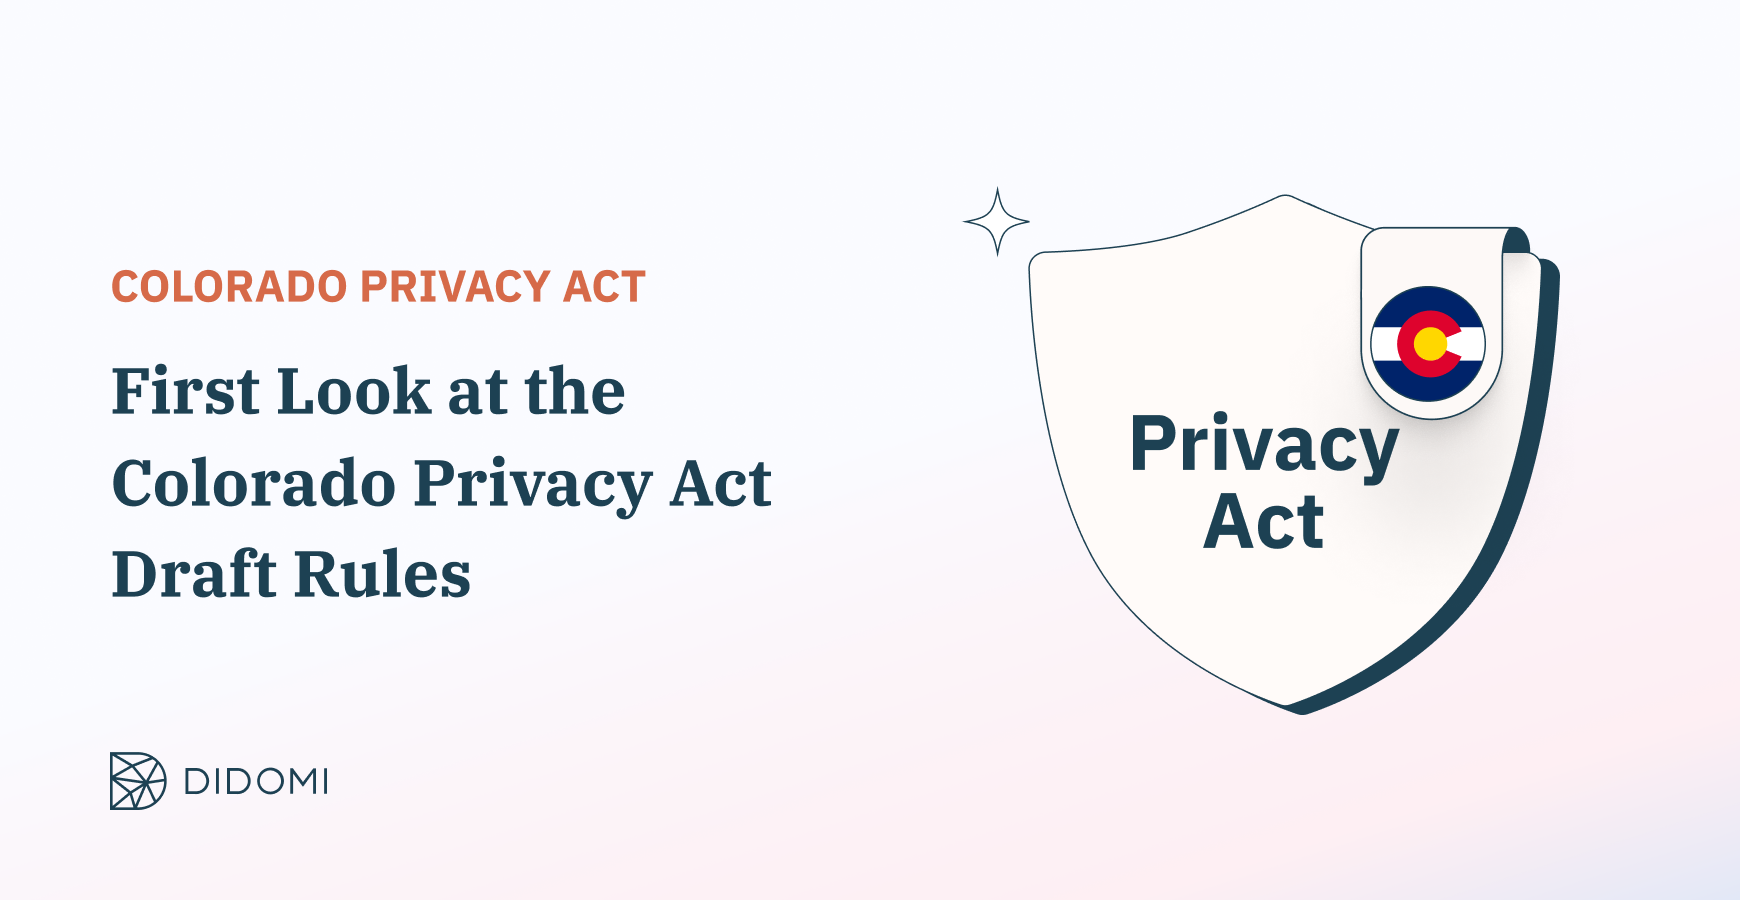 First look at the Colorado Privacy Act draft rules